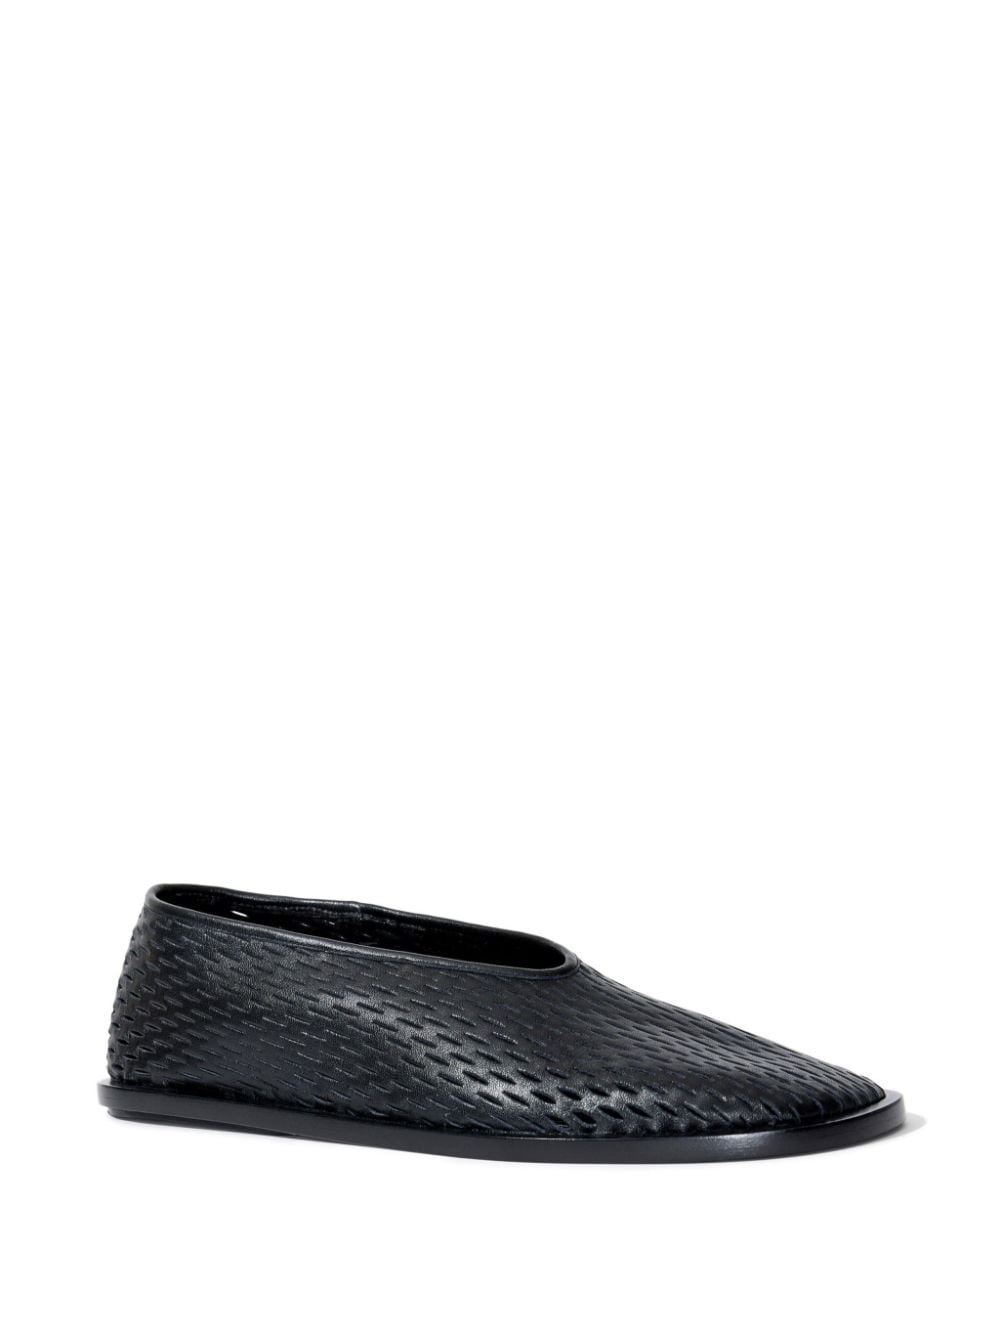 square perforated slippers - 2